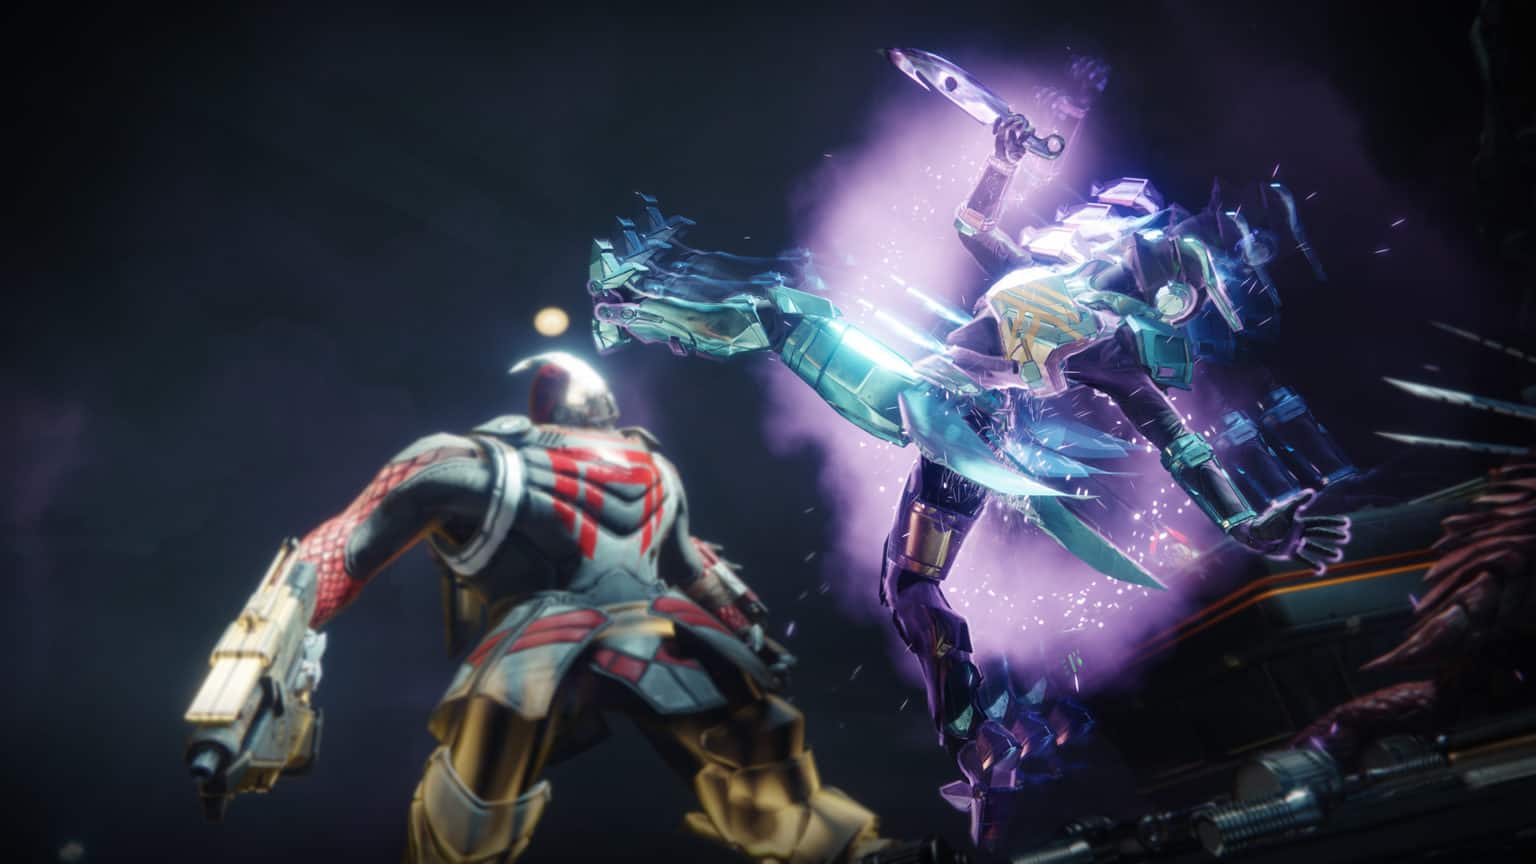 Destiny 2 Showcase scheduled for August 24 by Bungie - VideoGamer.com